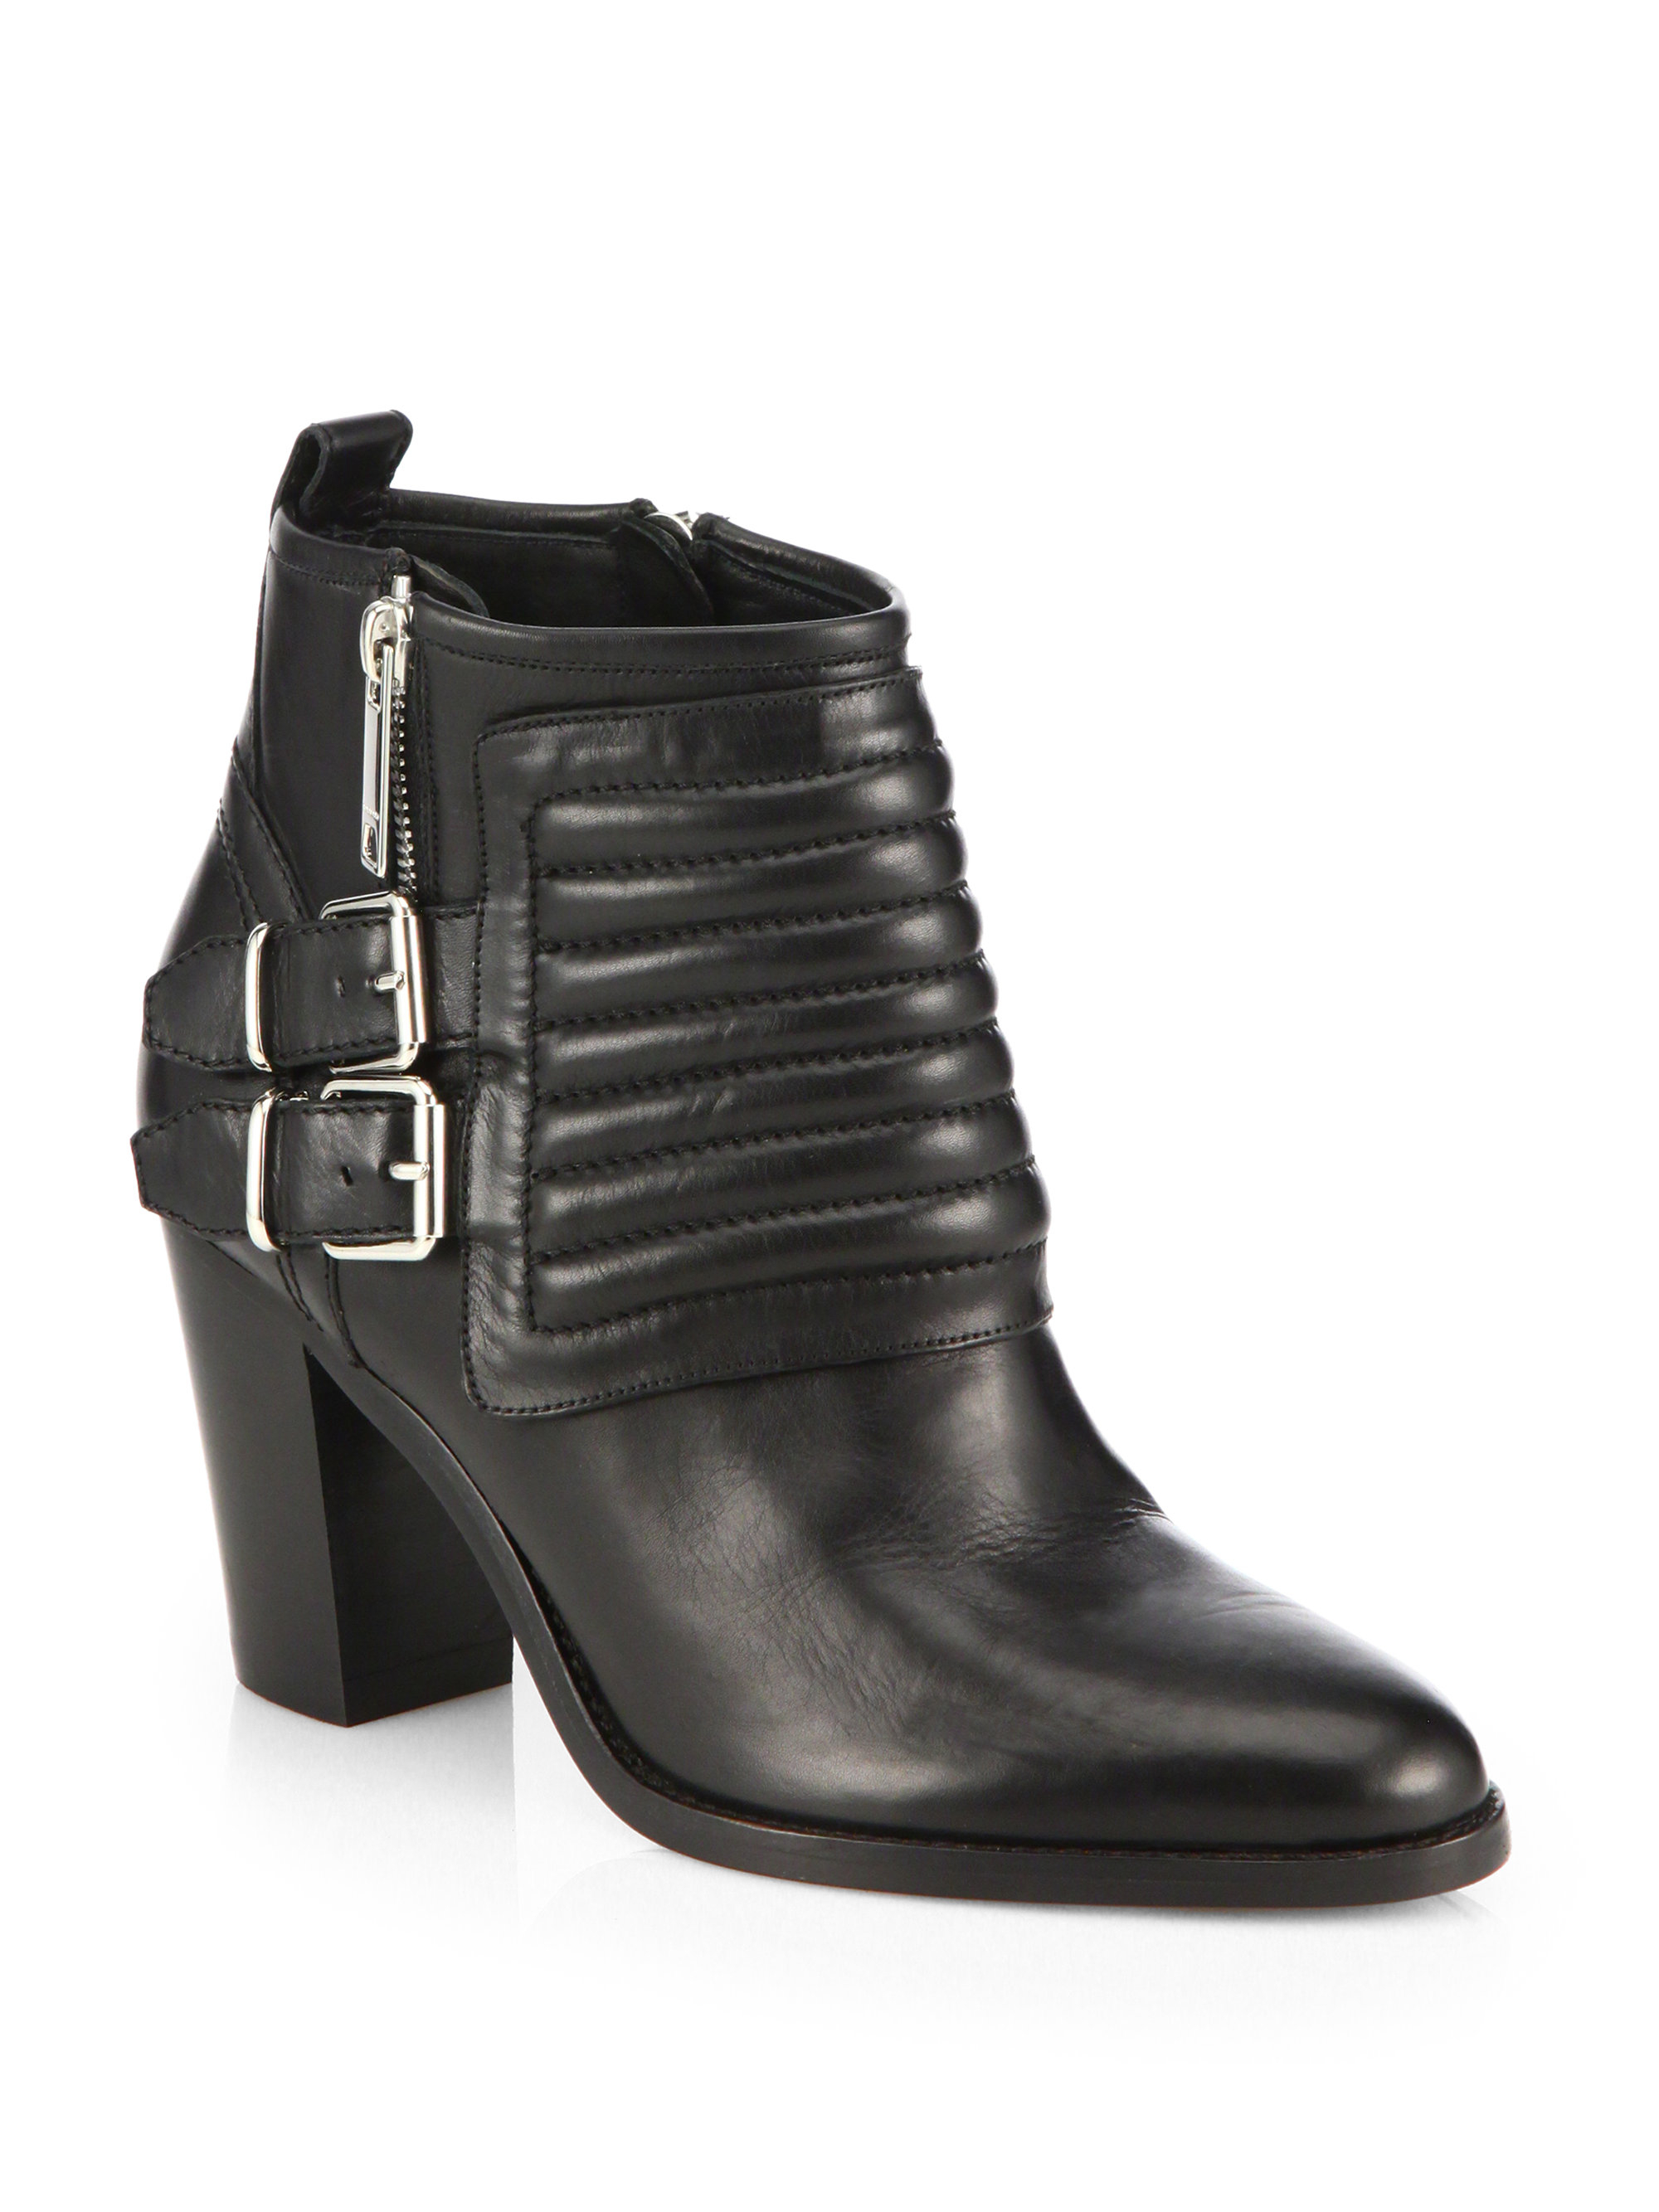 Lyst Burberry Hirshel Moto Ankle Boots in Black